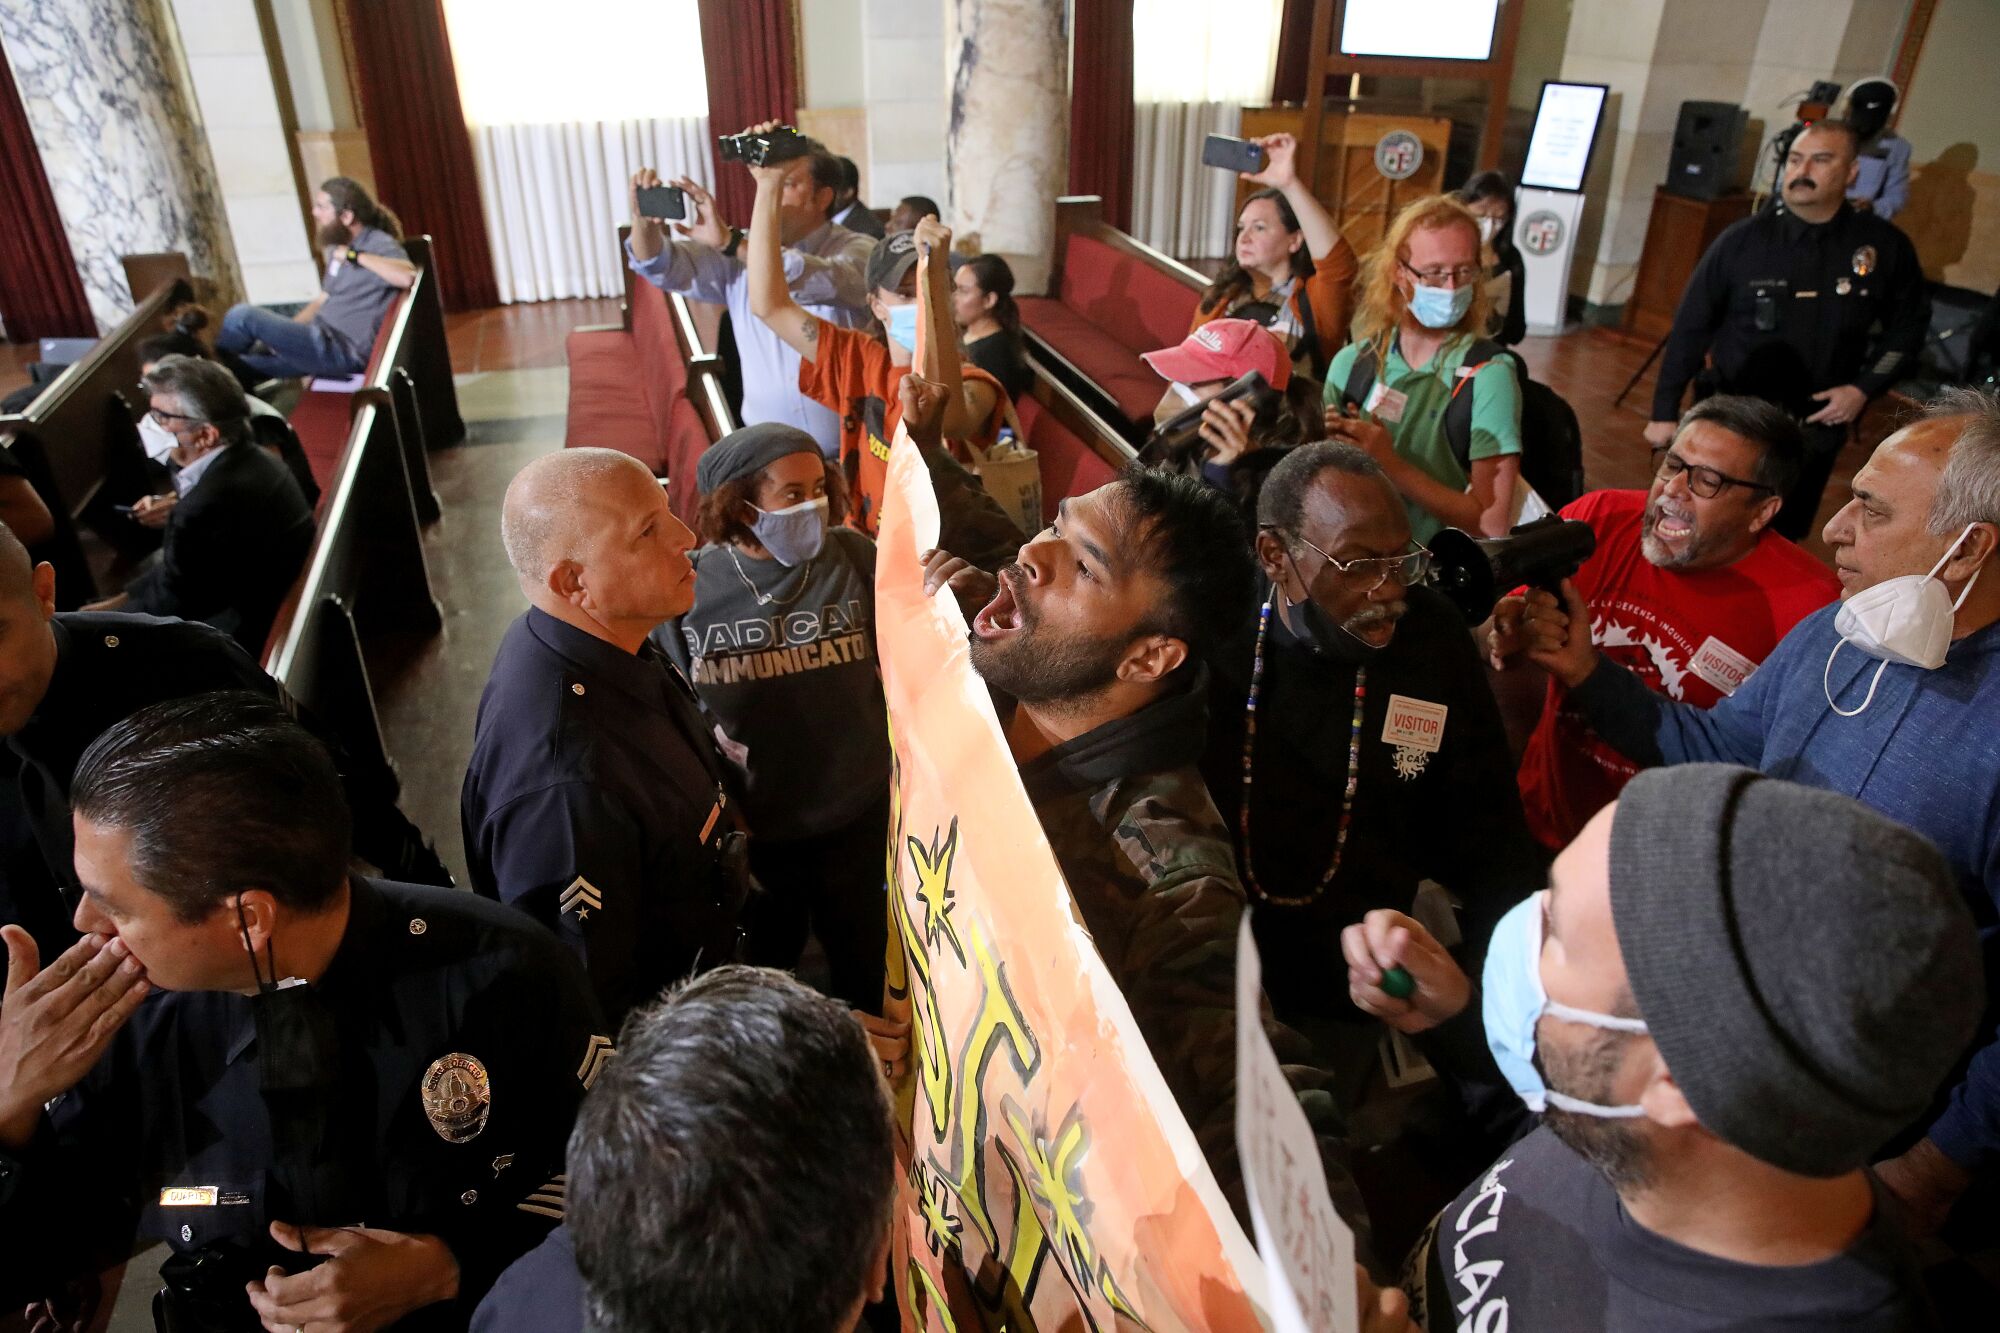 Protesters disrupt a council meeting on Nov. 1.